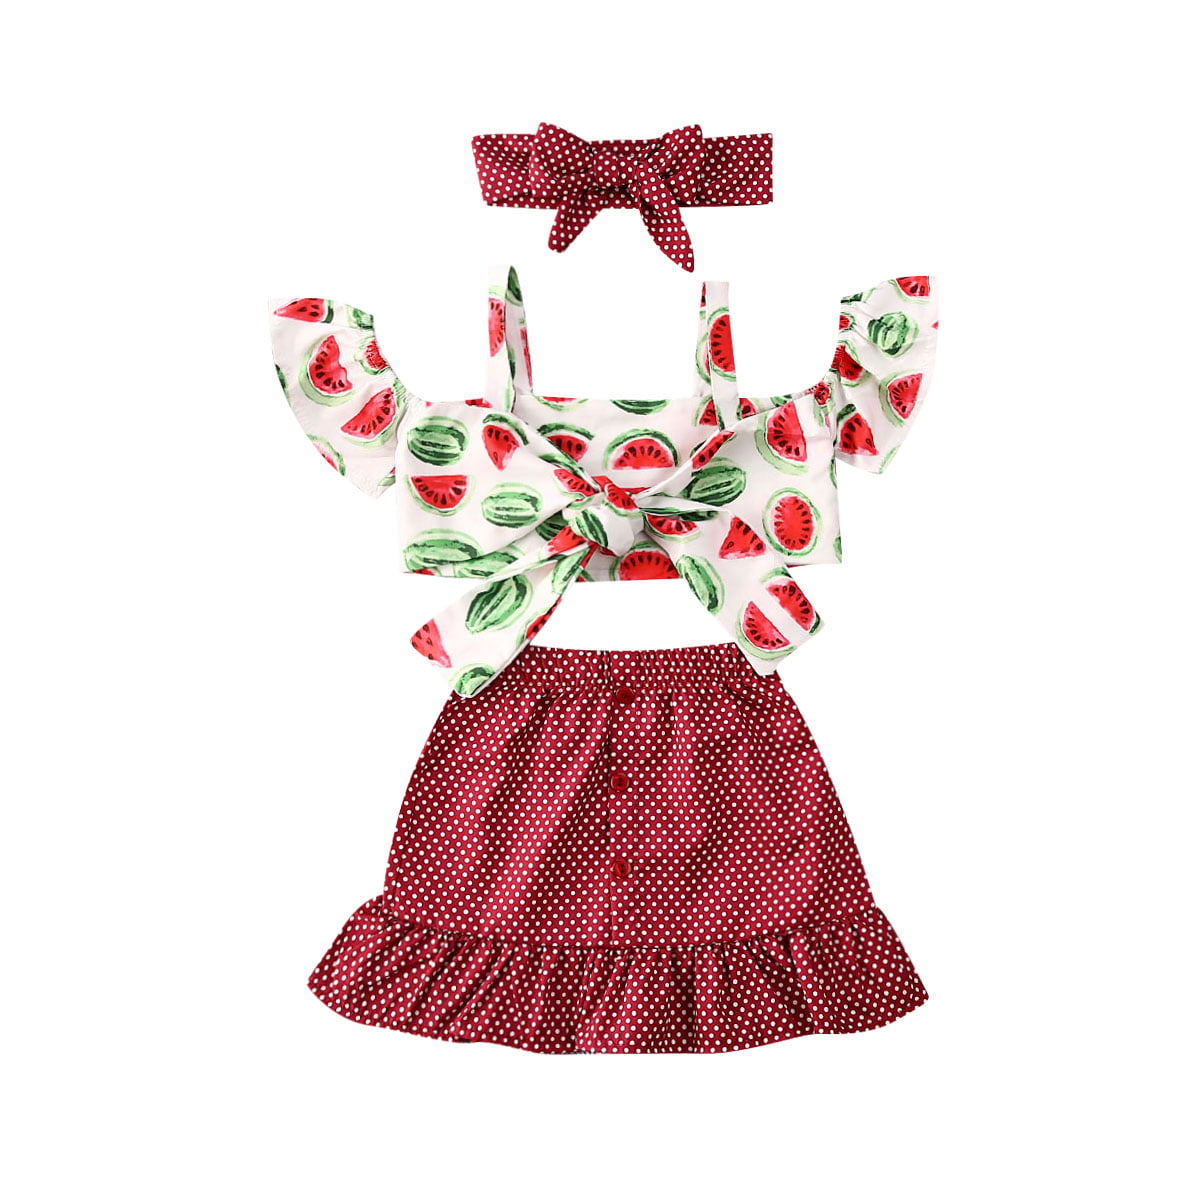 HenzWorld Toddler Kids Baby Girl Floral Outfit Lace Sleeveless Tank Top Boho Skirt Dress Summer Clothes Outfits Set 1-6 Years 